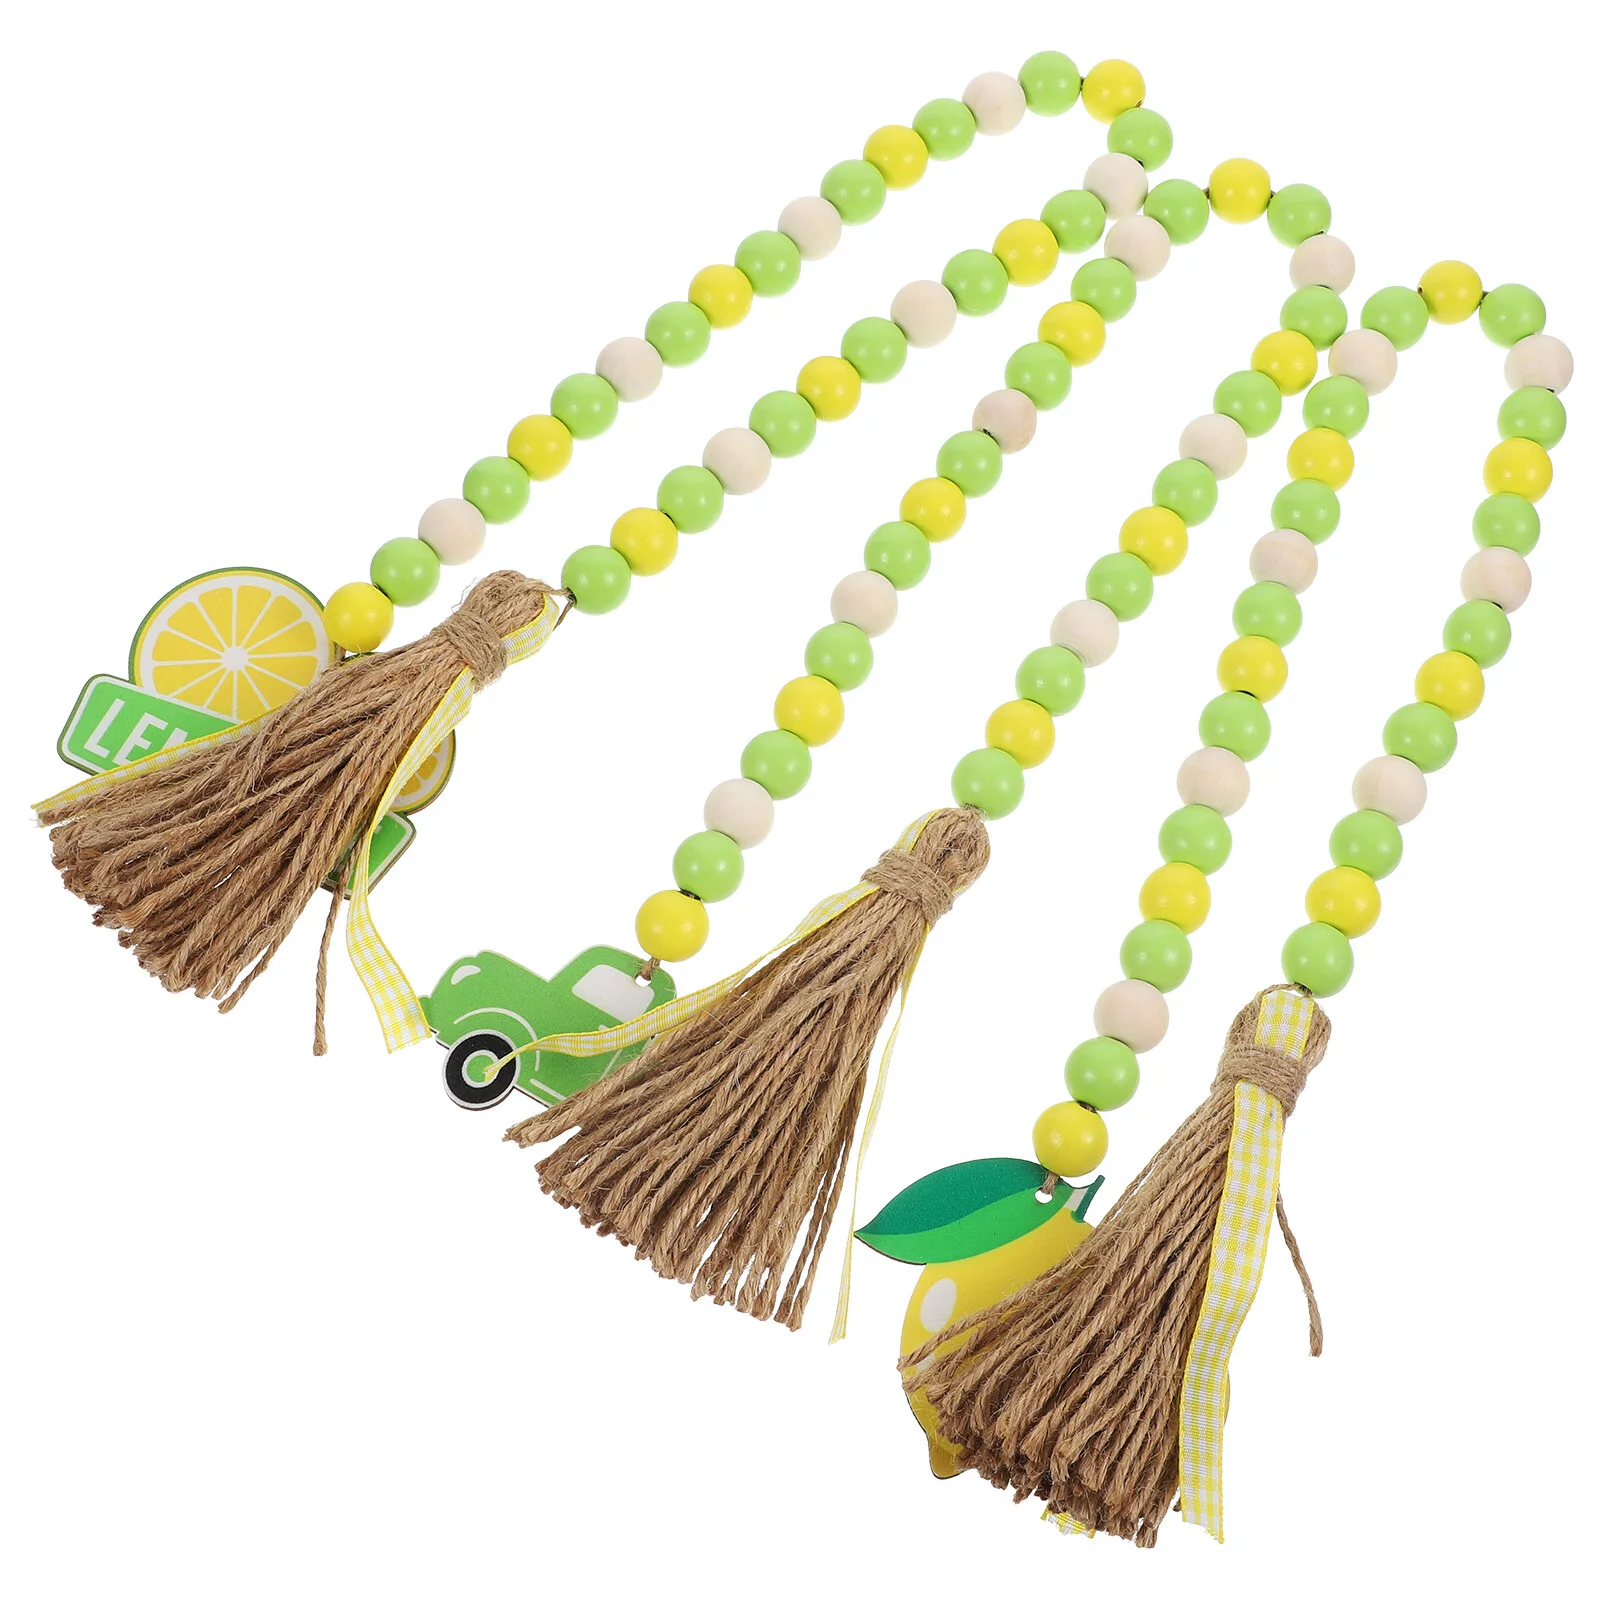 

3 Pcs Lemon Wood Beads Faux Flower Garland Hanging String Theme Tiered Tray Decor Home Party Beaded Chic Ornament